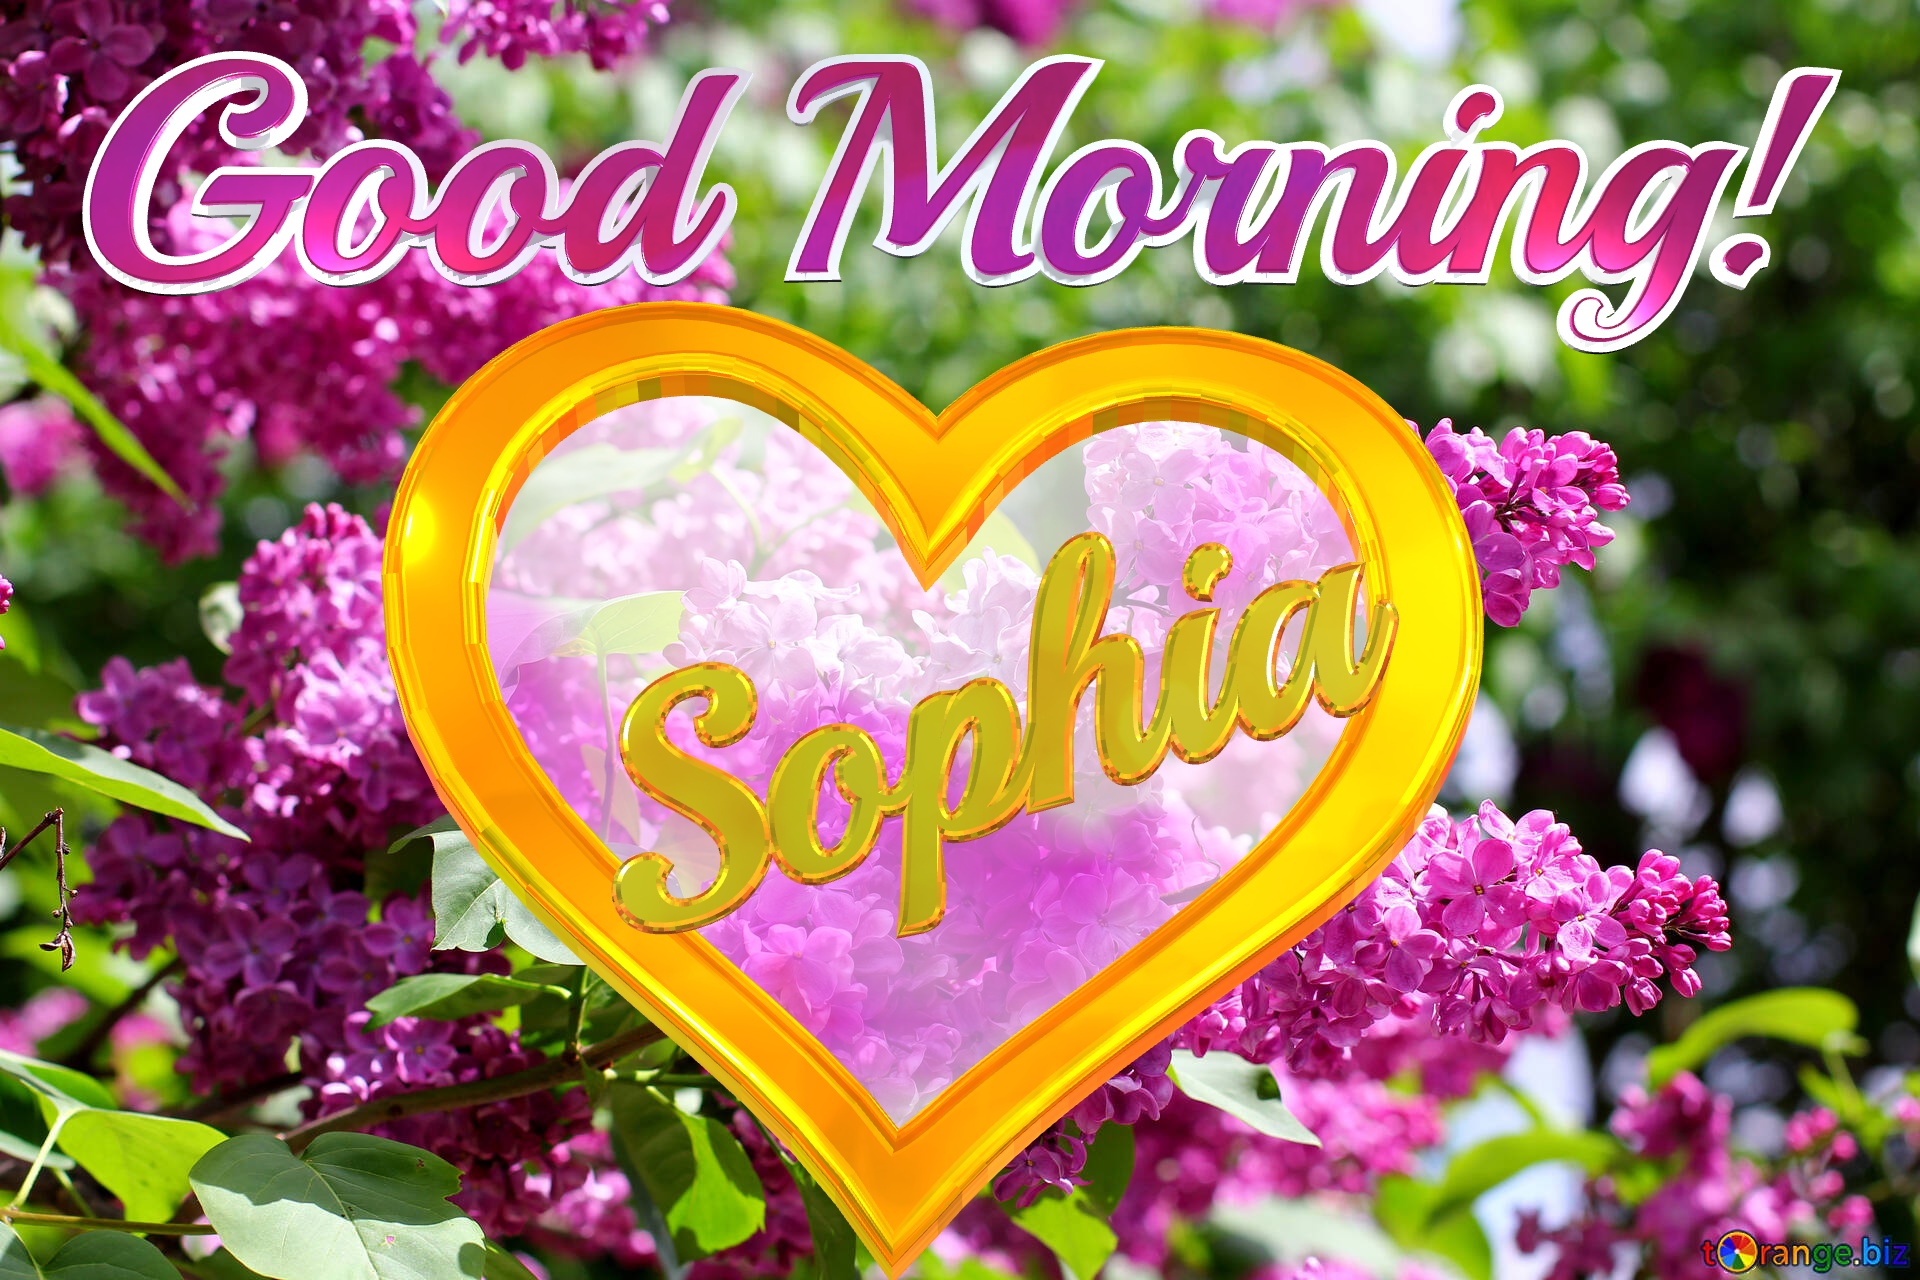  Good Morning! Sophia   Bright picture with lilac flowers №37487